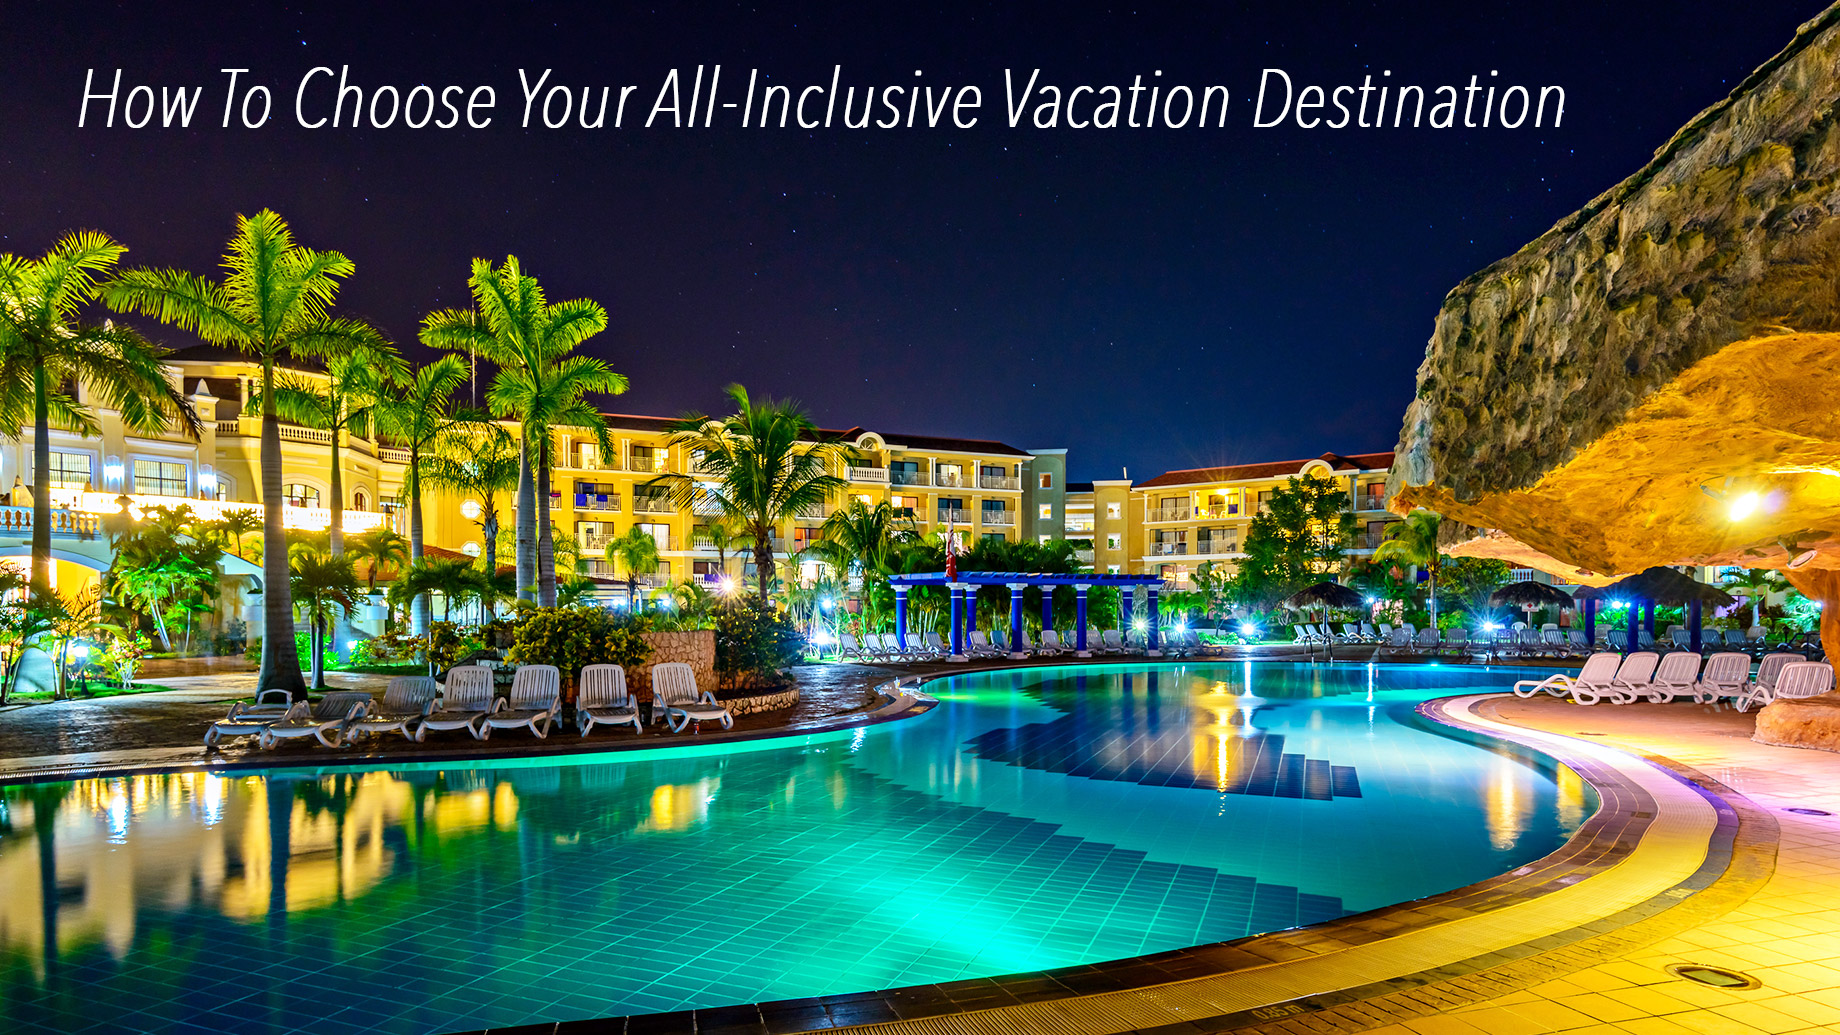 How To Choose Your All-Inclusive Vacation Destination